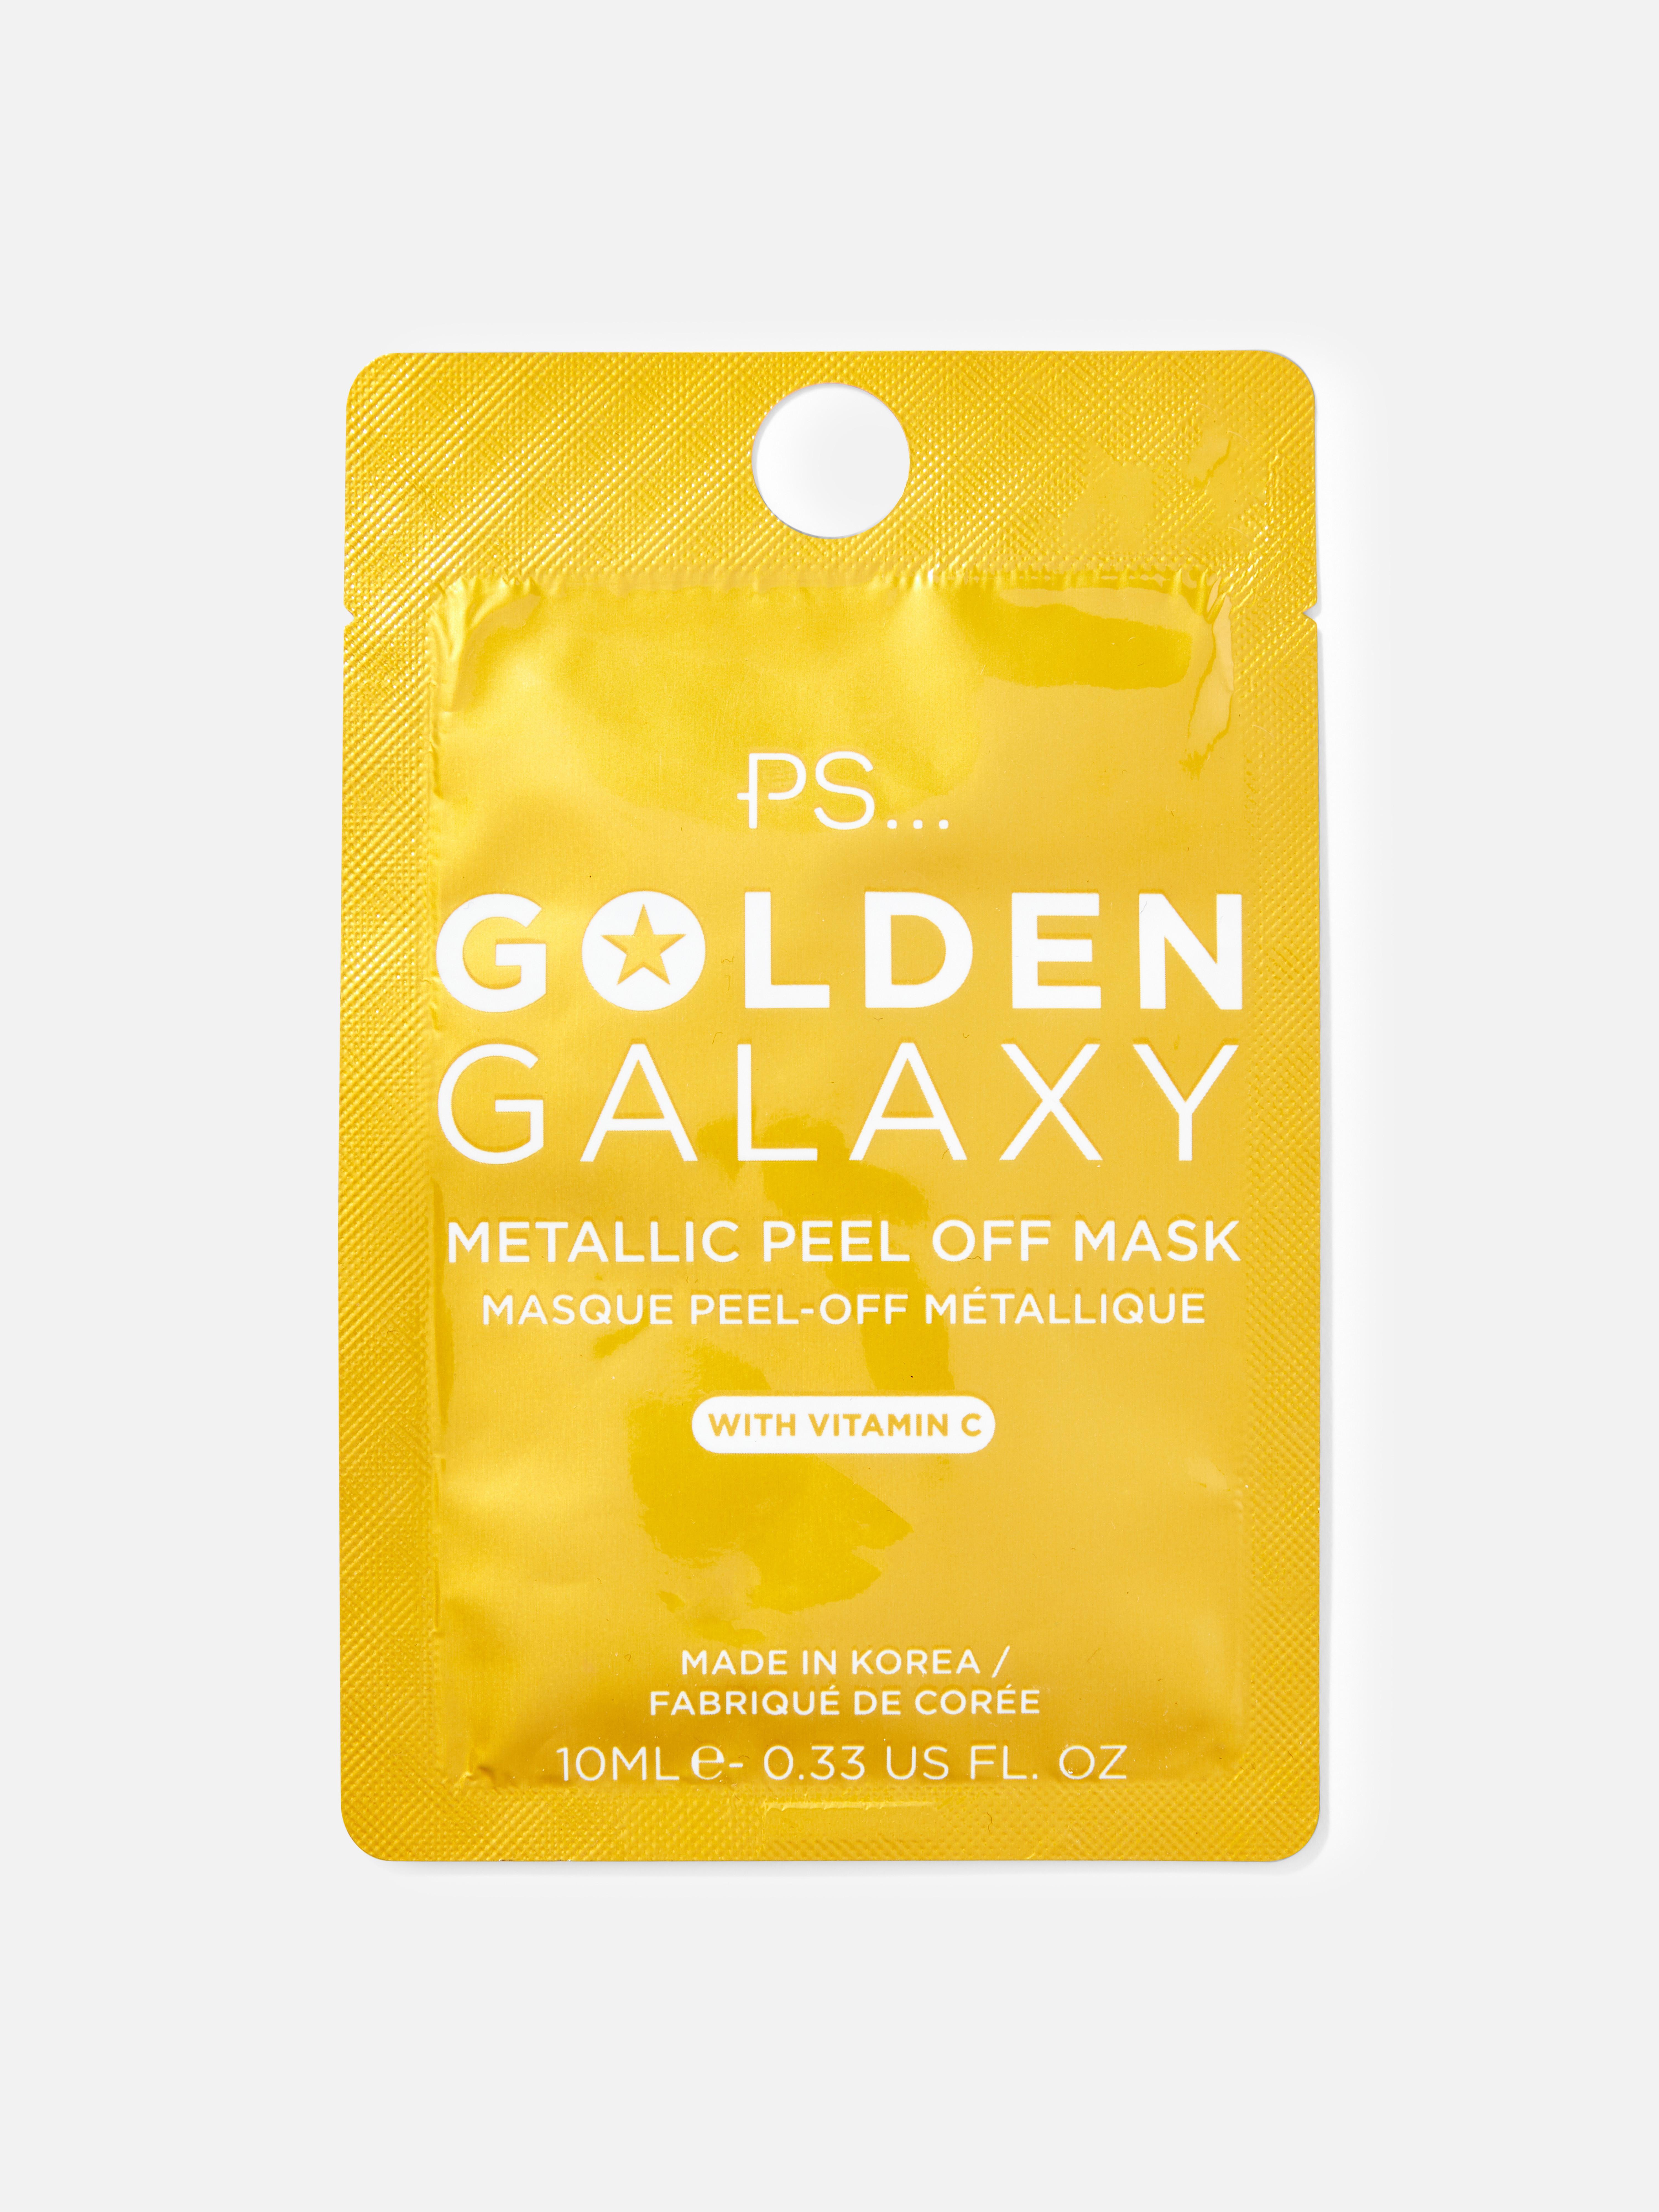 PS Golden Galaxy Peel Off Face Mask